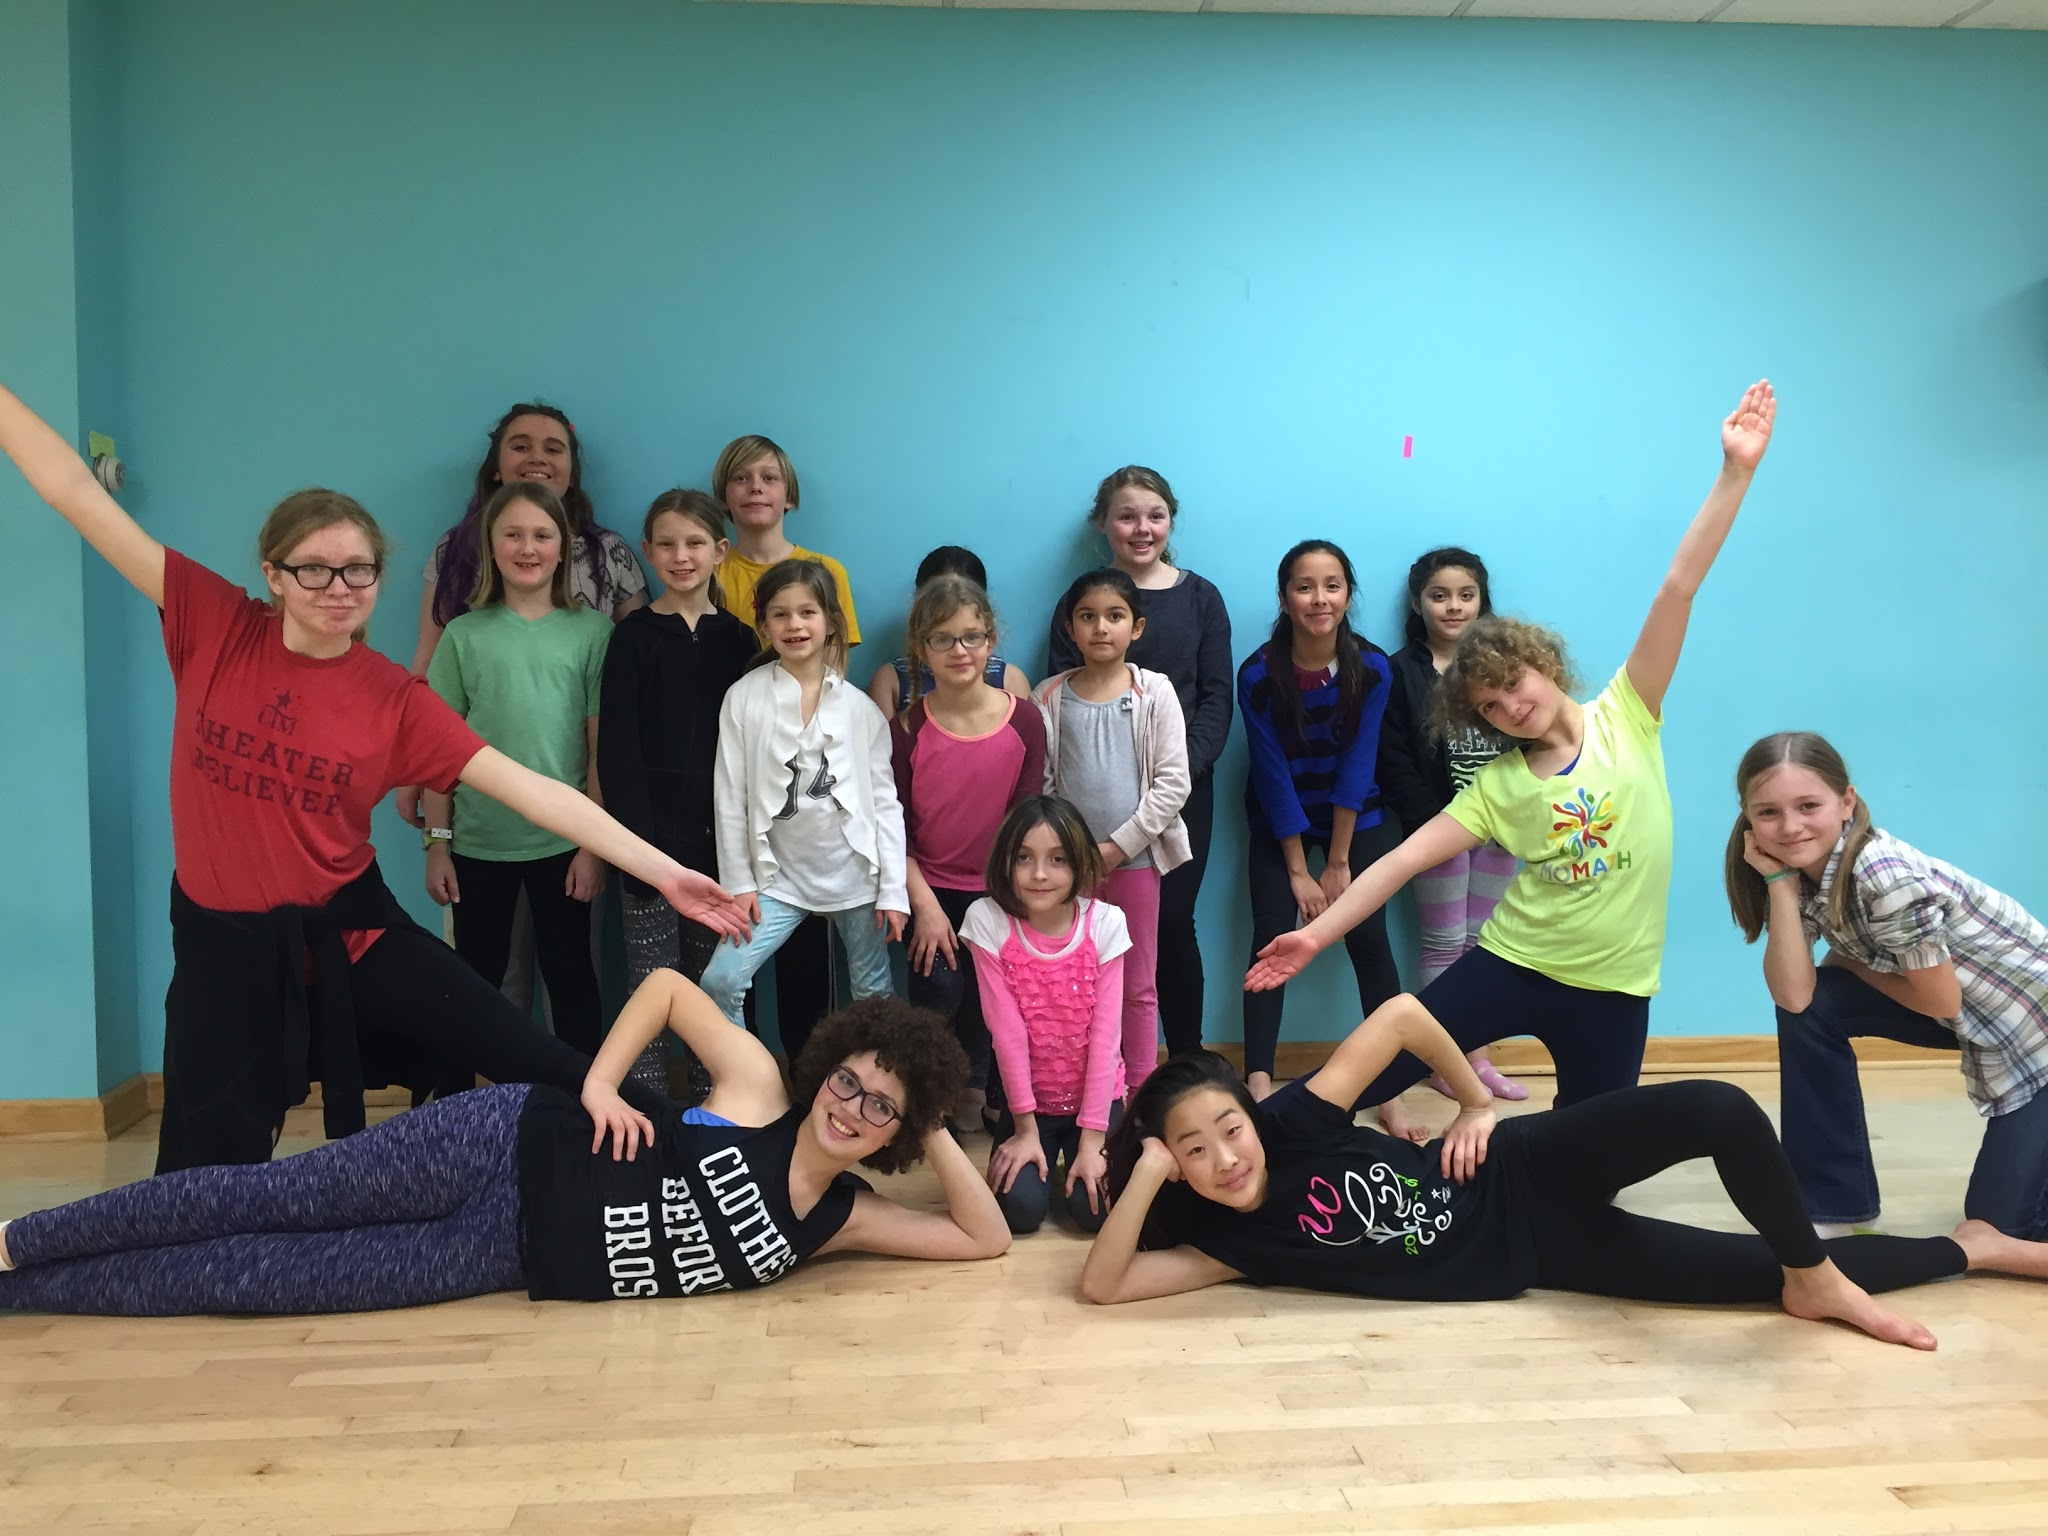 Youth Dance Classes